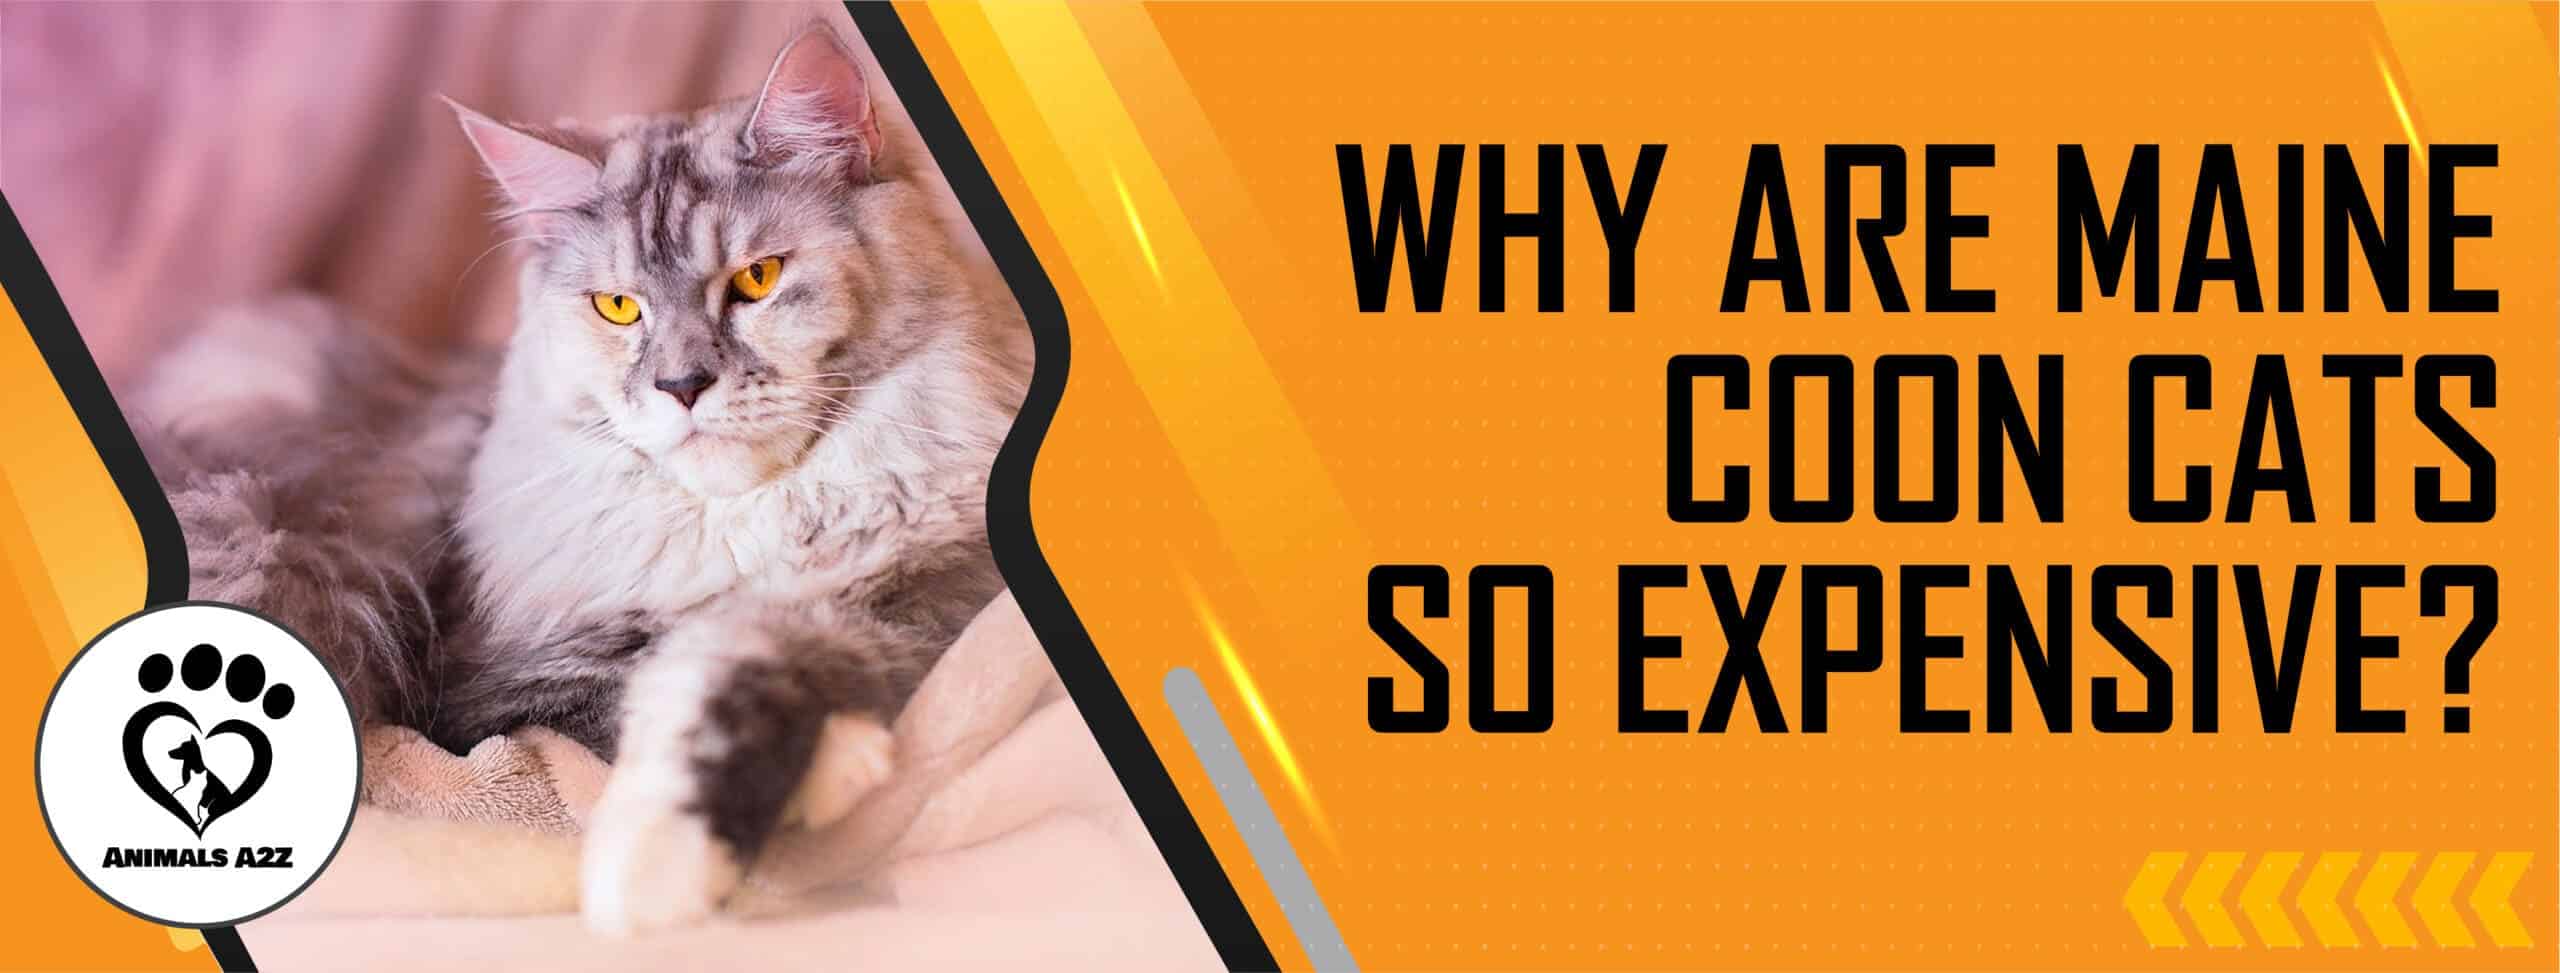 Why are Maine coon cats so expensive?